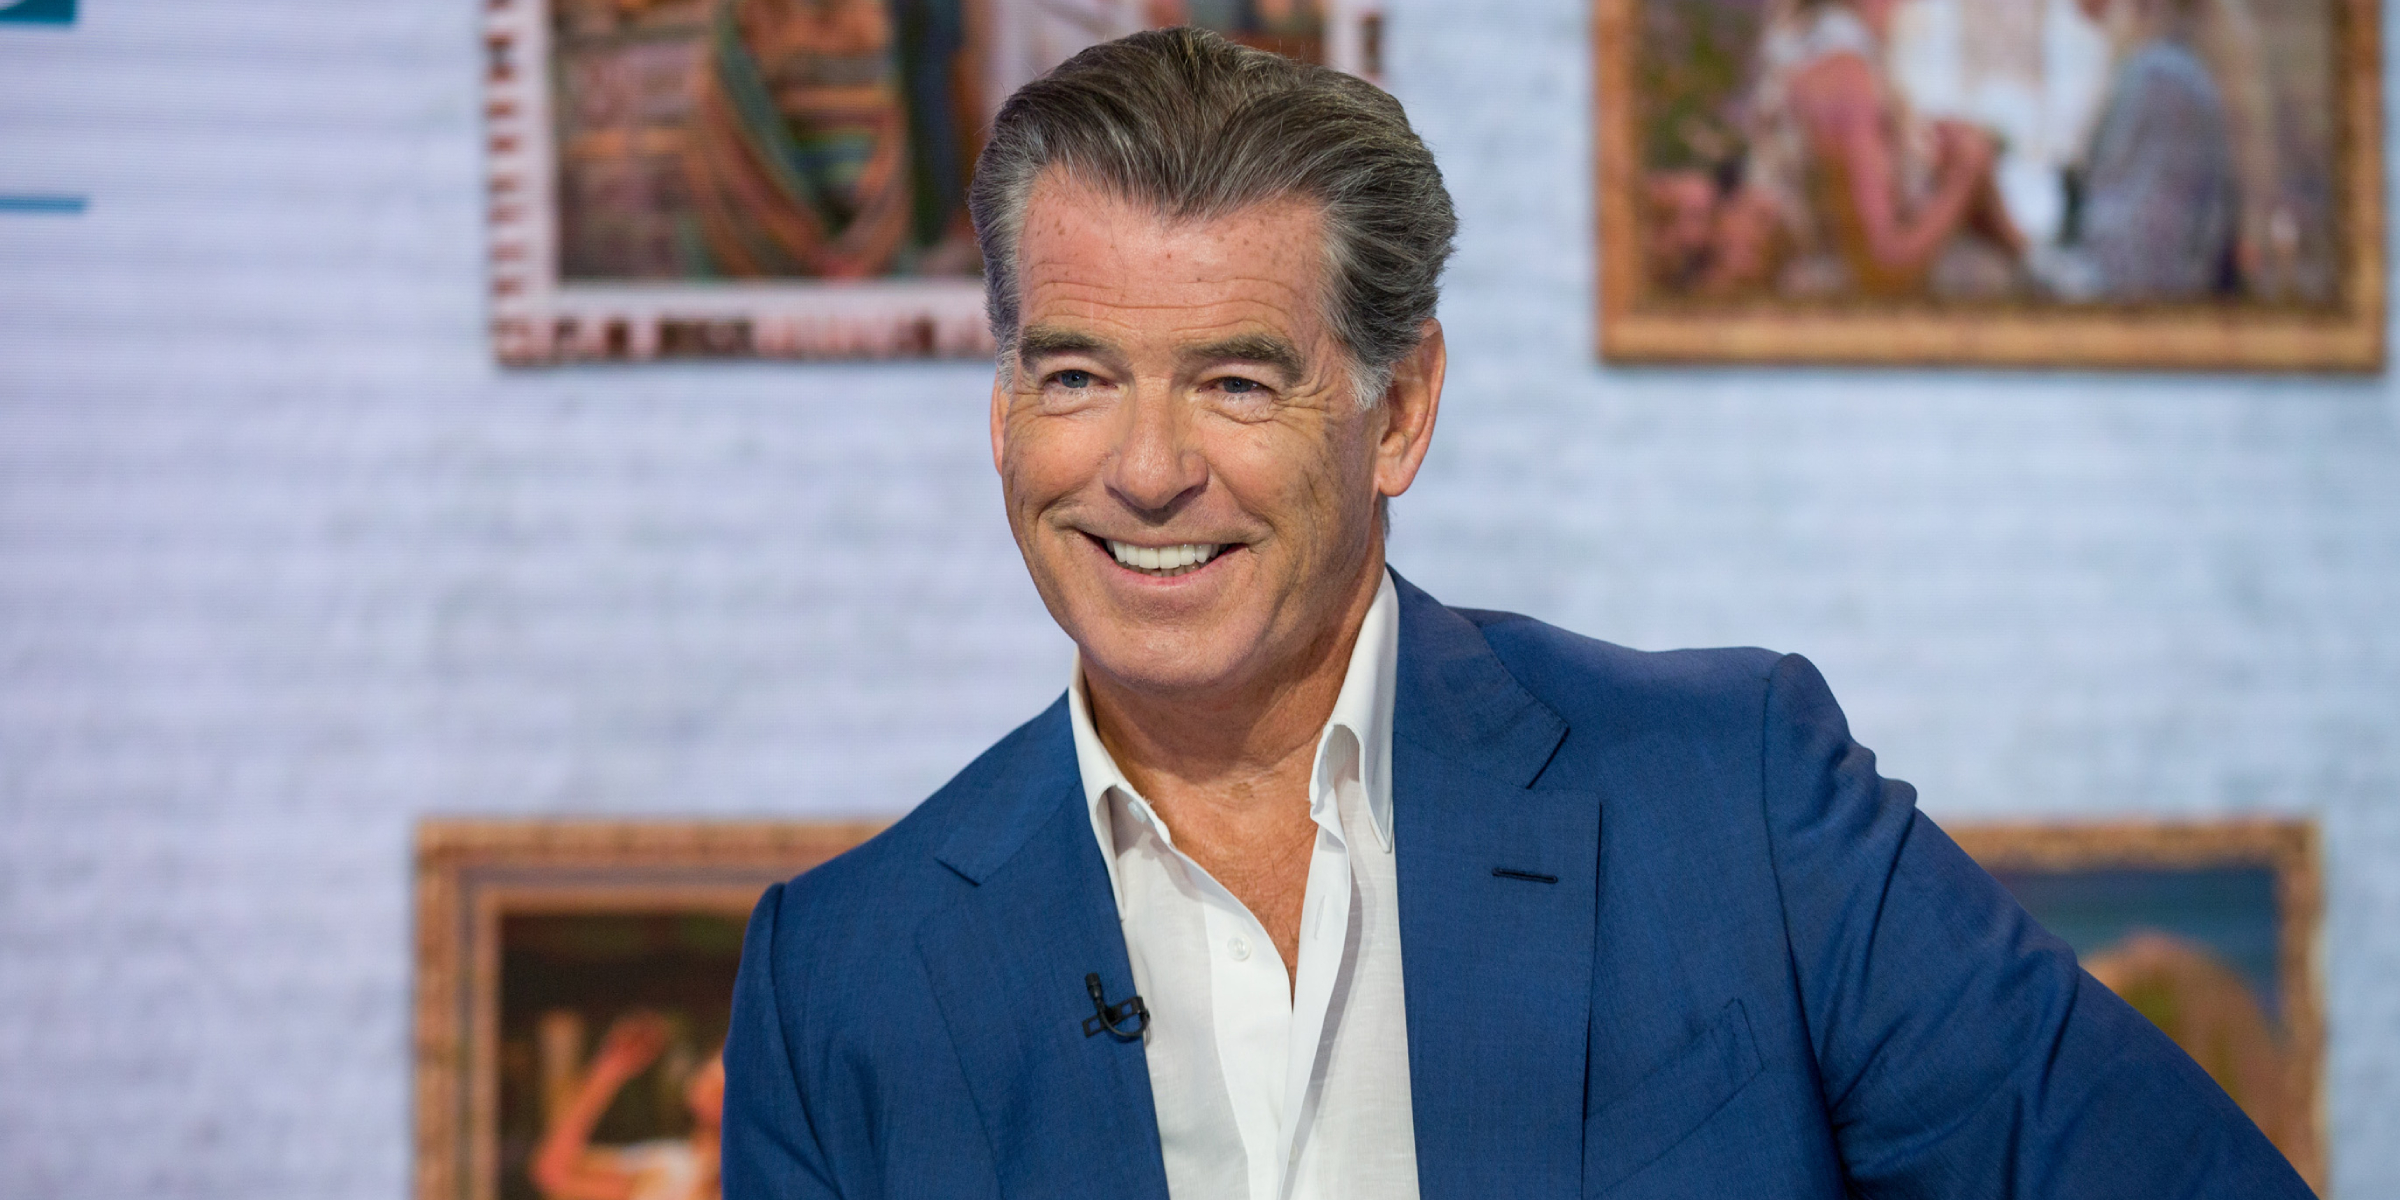 Pierce Brosnan | Source: Getty Images